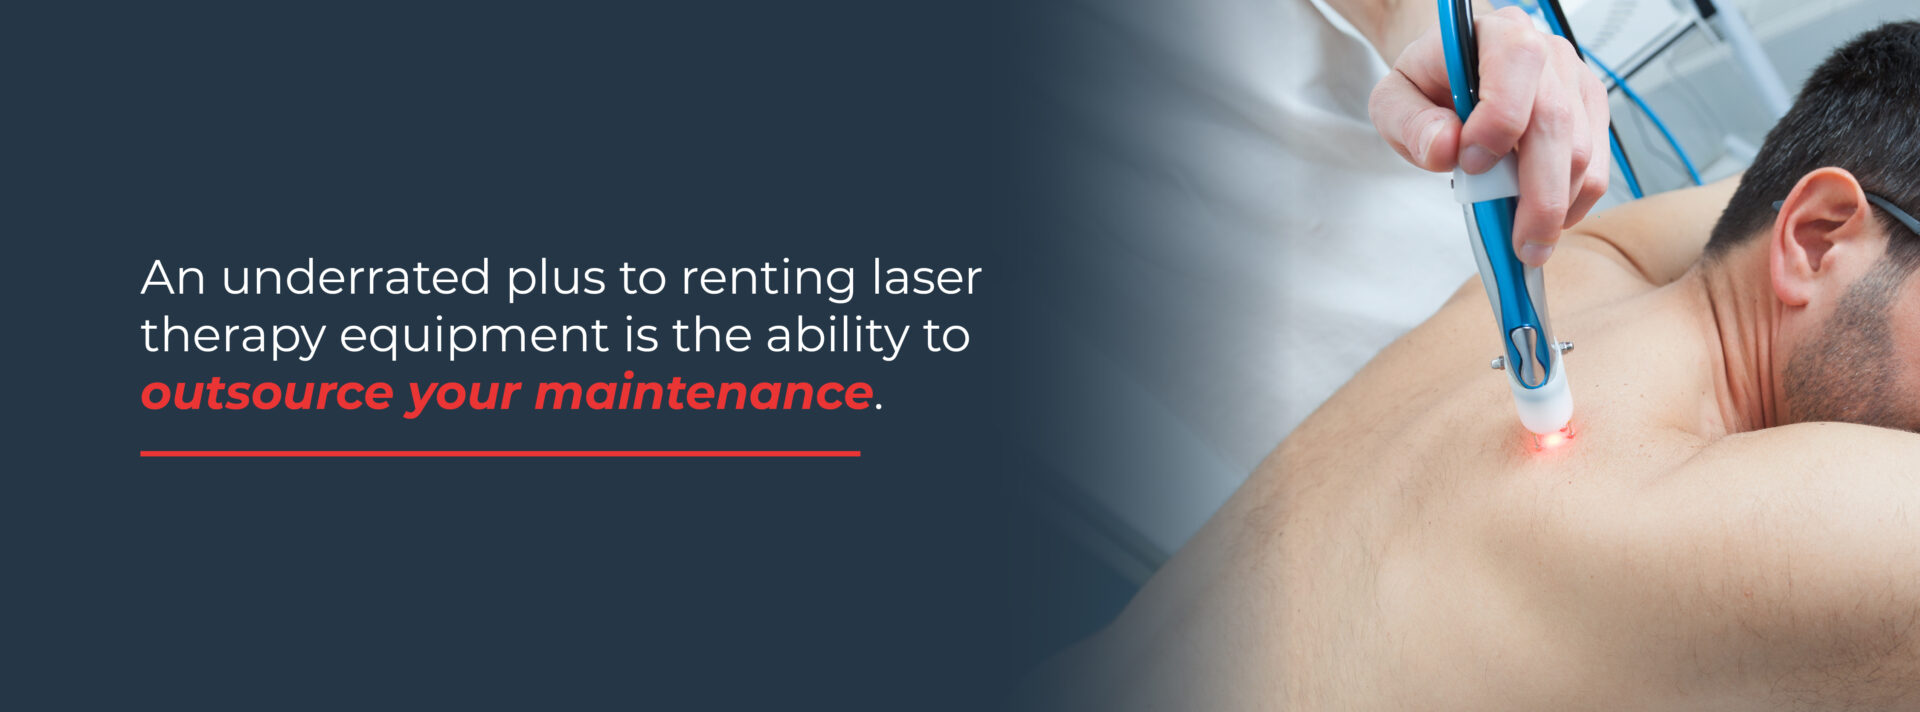 outsource your maintenance with laser rentals